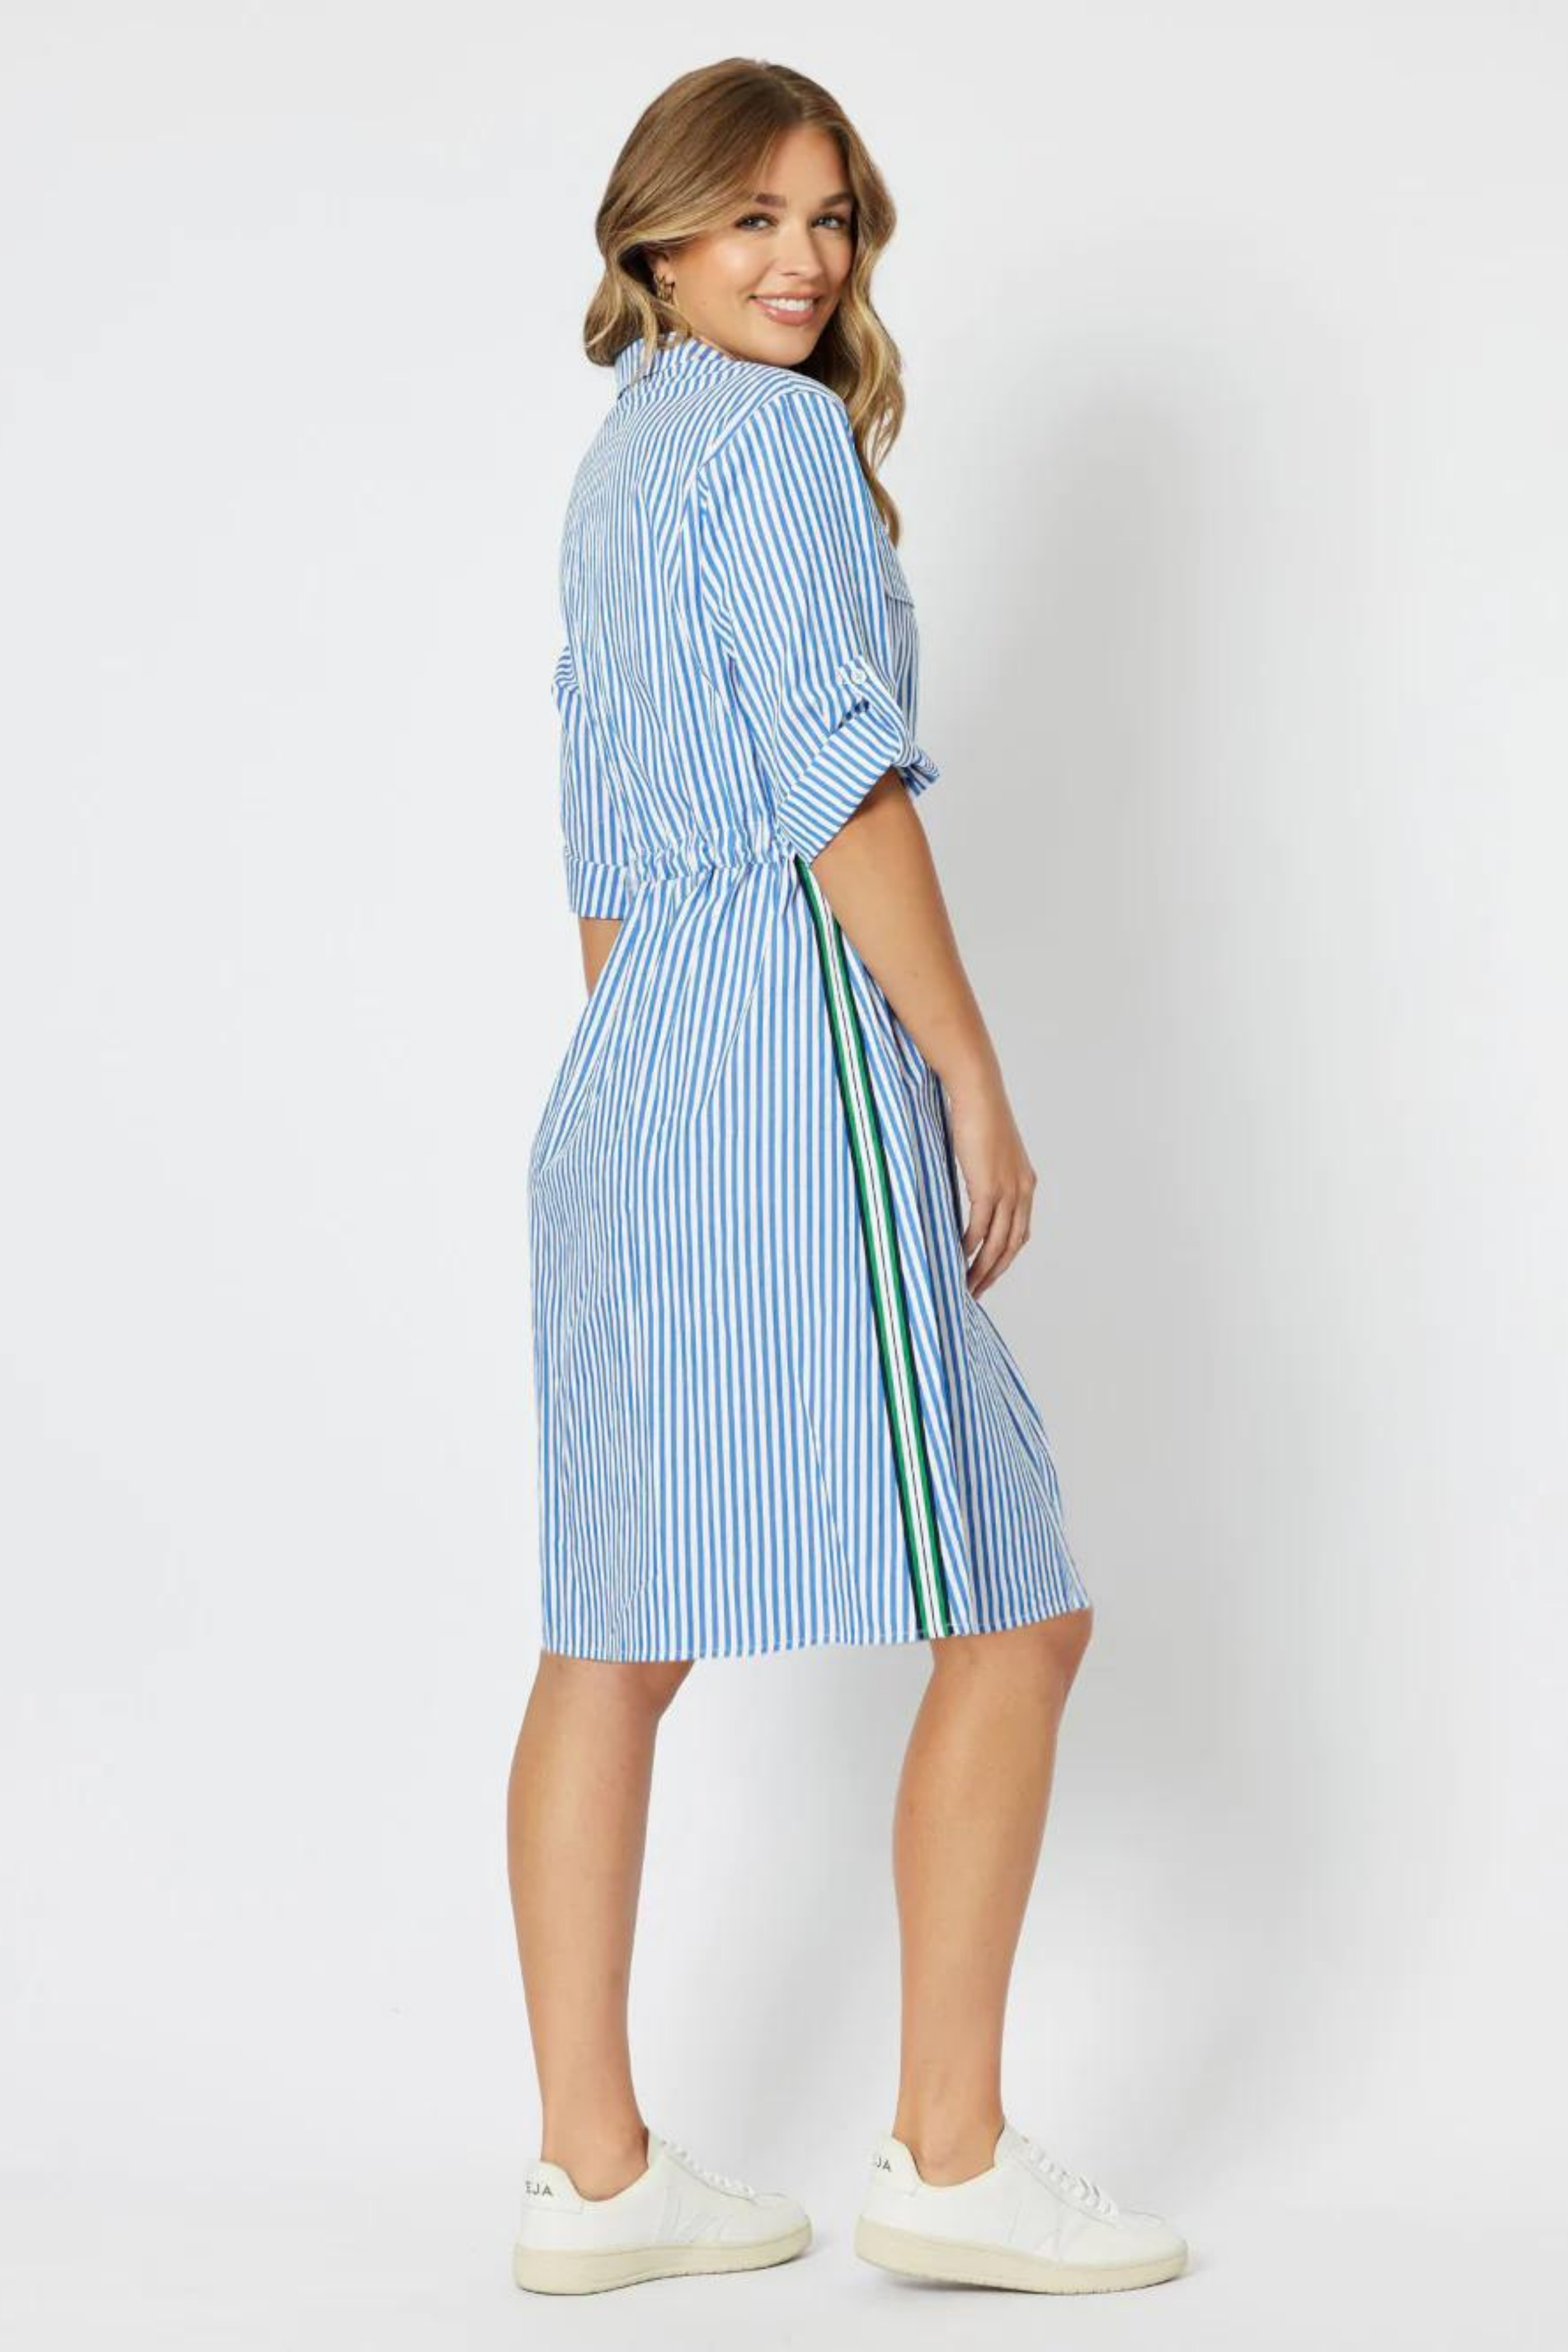 Hadley Stripe Shirt Dress in Blue and White